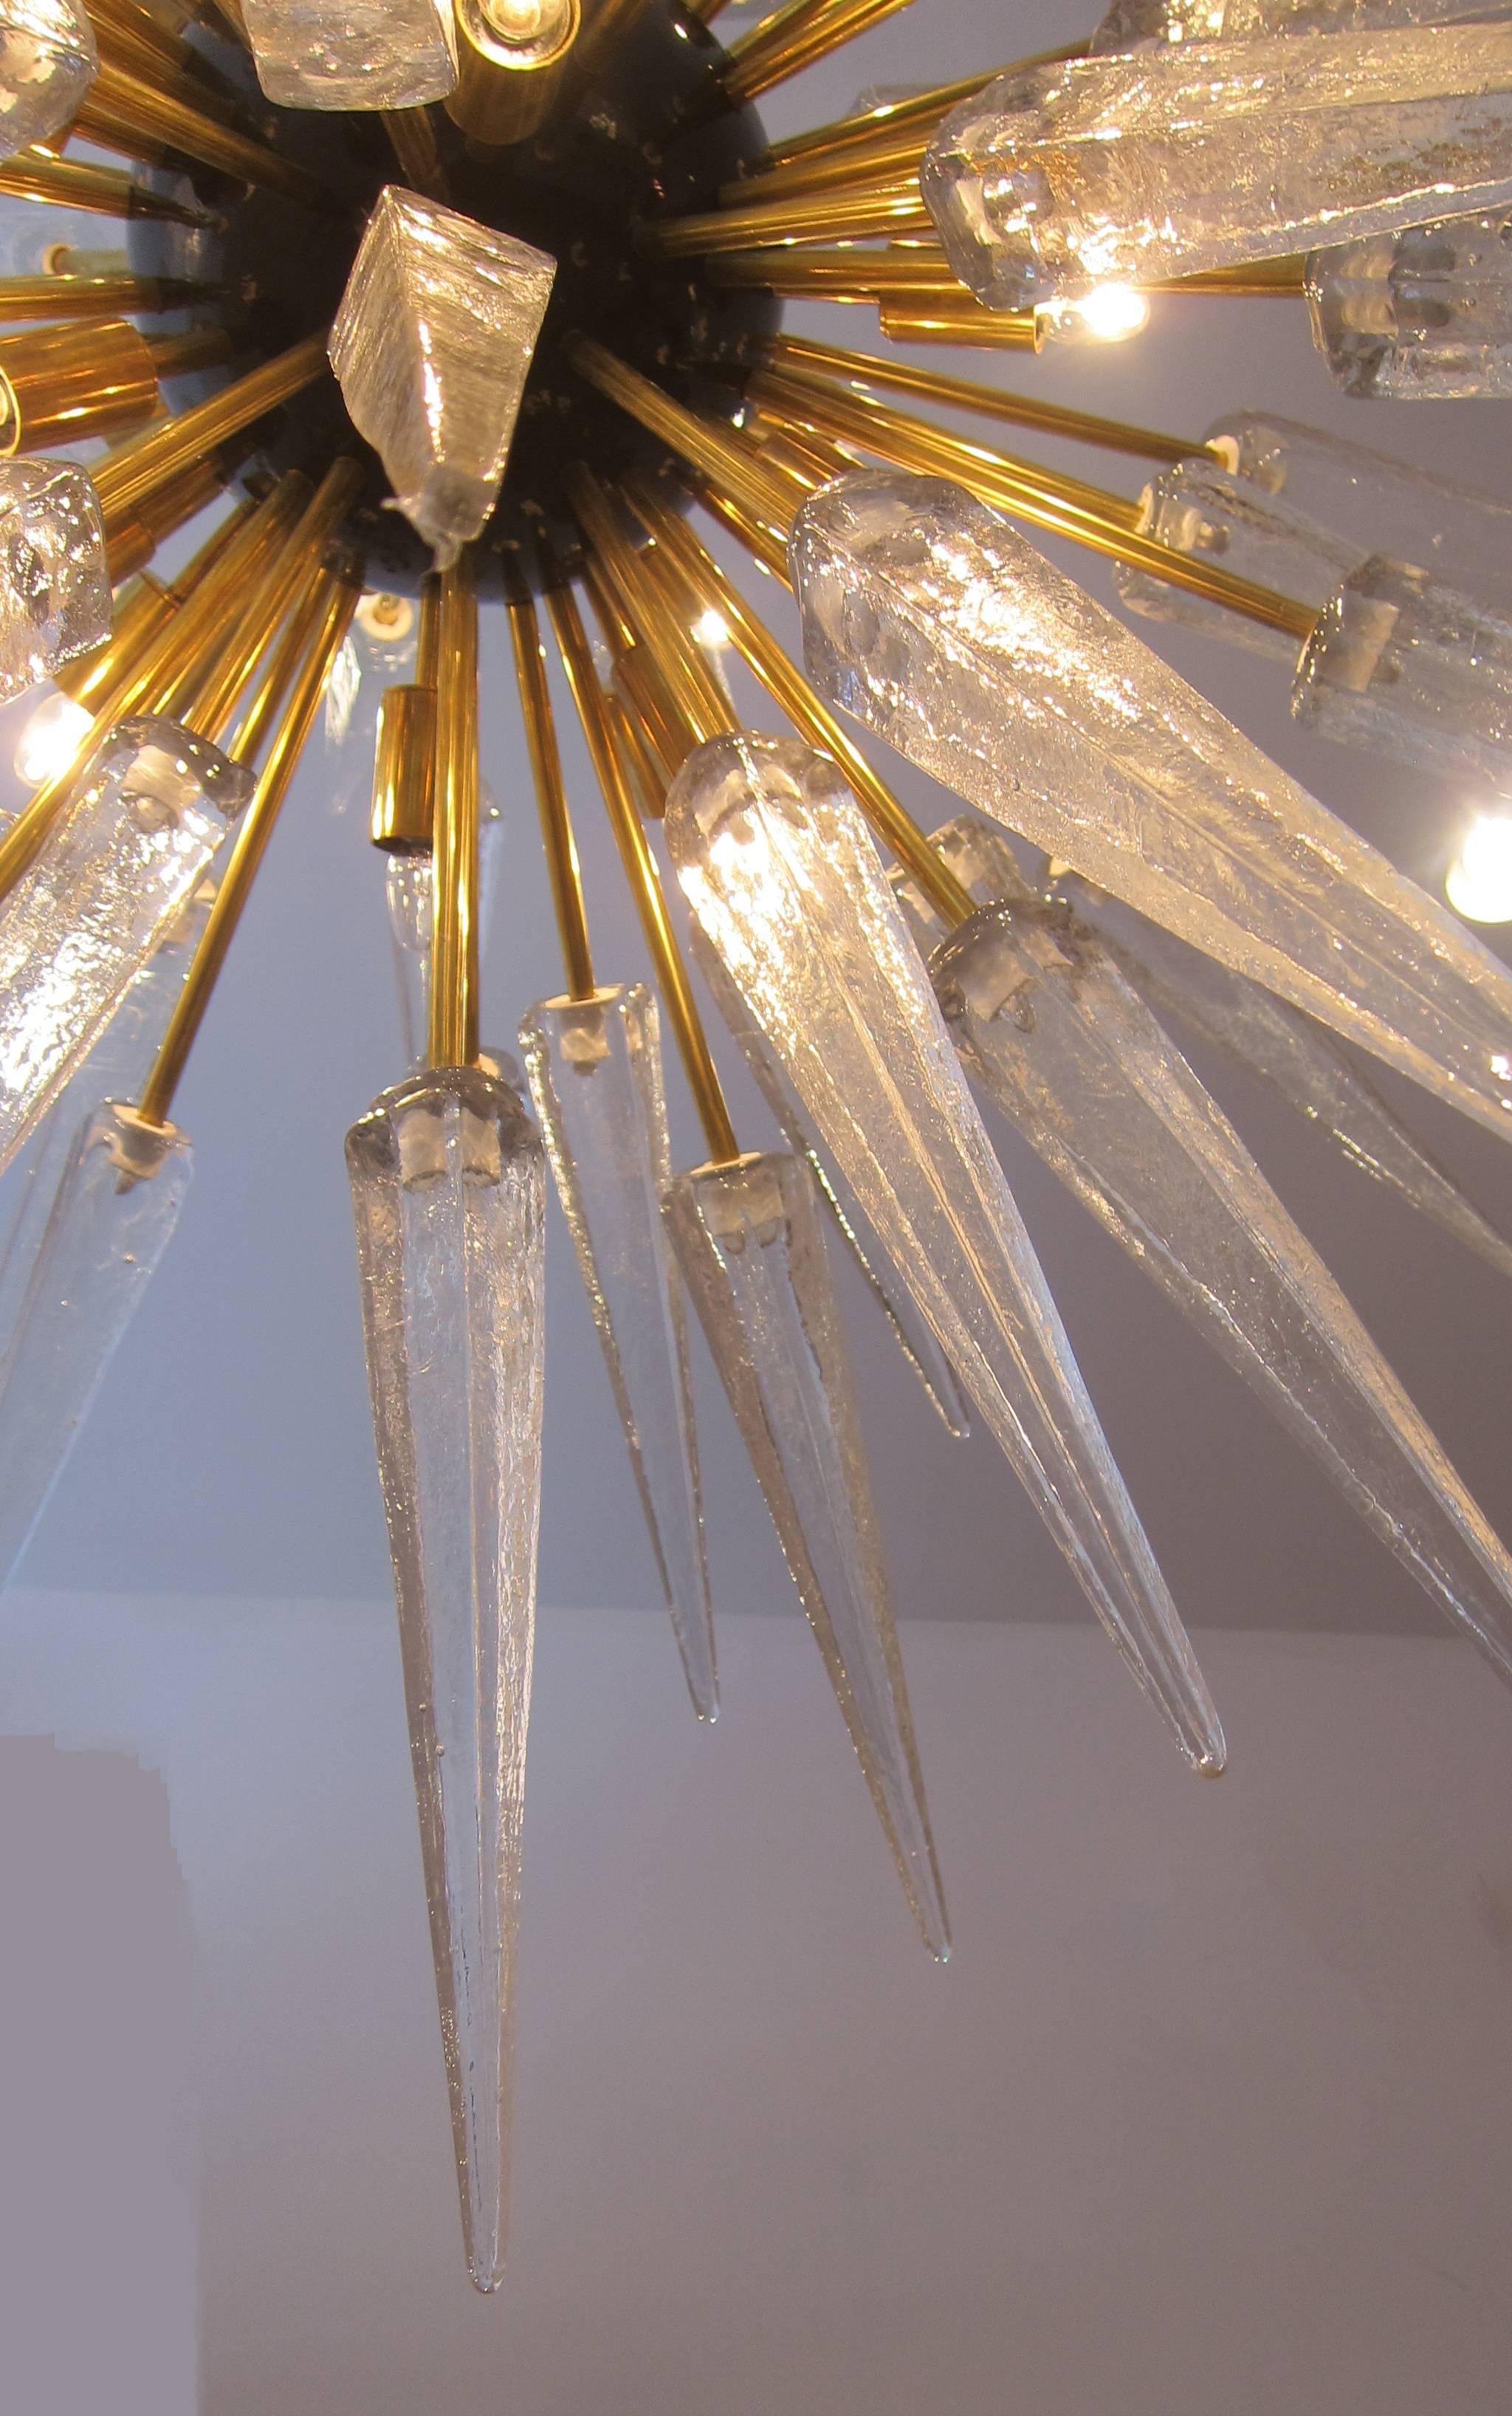 Large glass spiked starburst chandelier with black enameled center sphere finish. Brass rods.
For additional questions regarding this item, please click the "Contact Dealer" button or see dealer details for telephone number